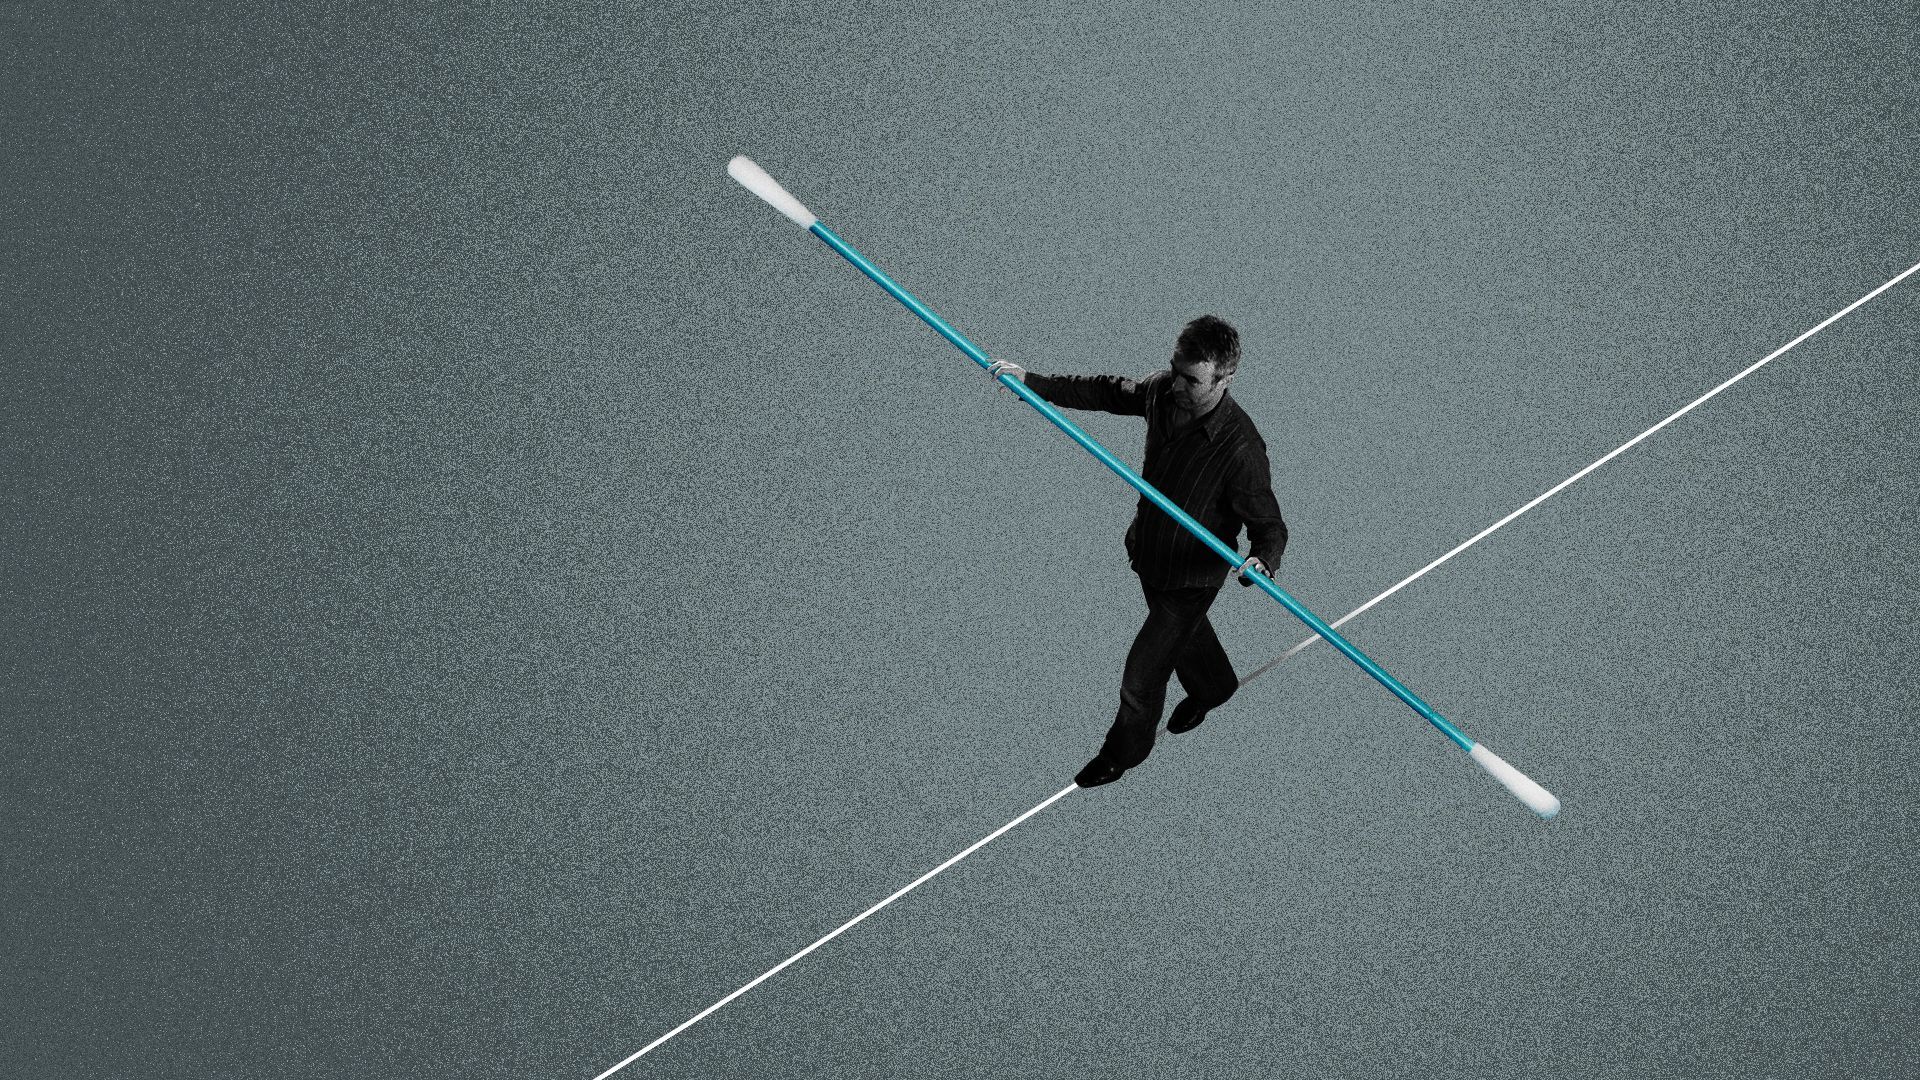 Illustration of a man walking the tight rope, using a large swab as a balancing pole.